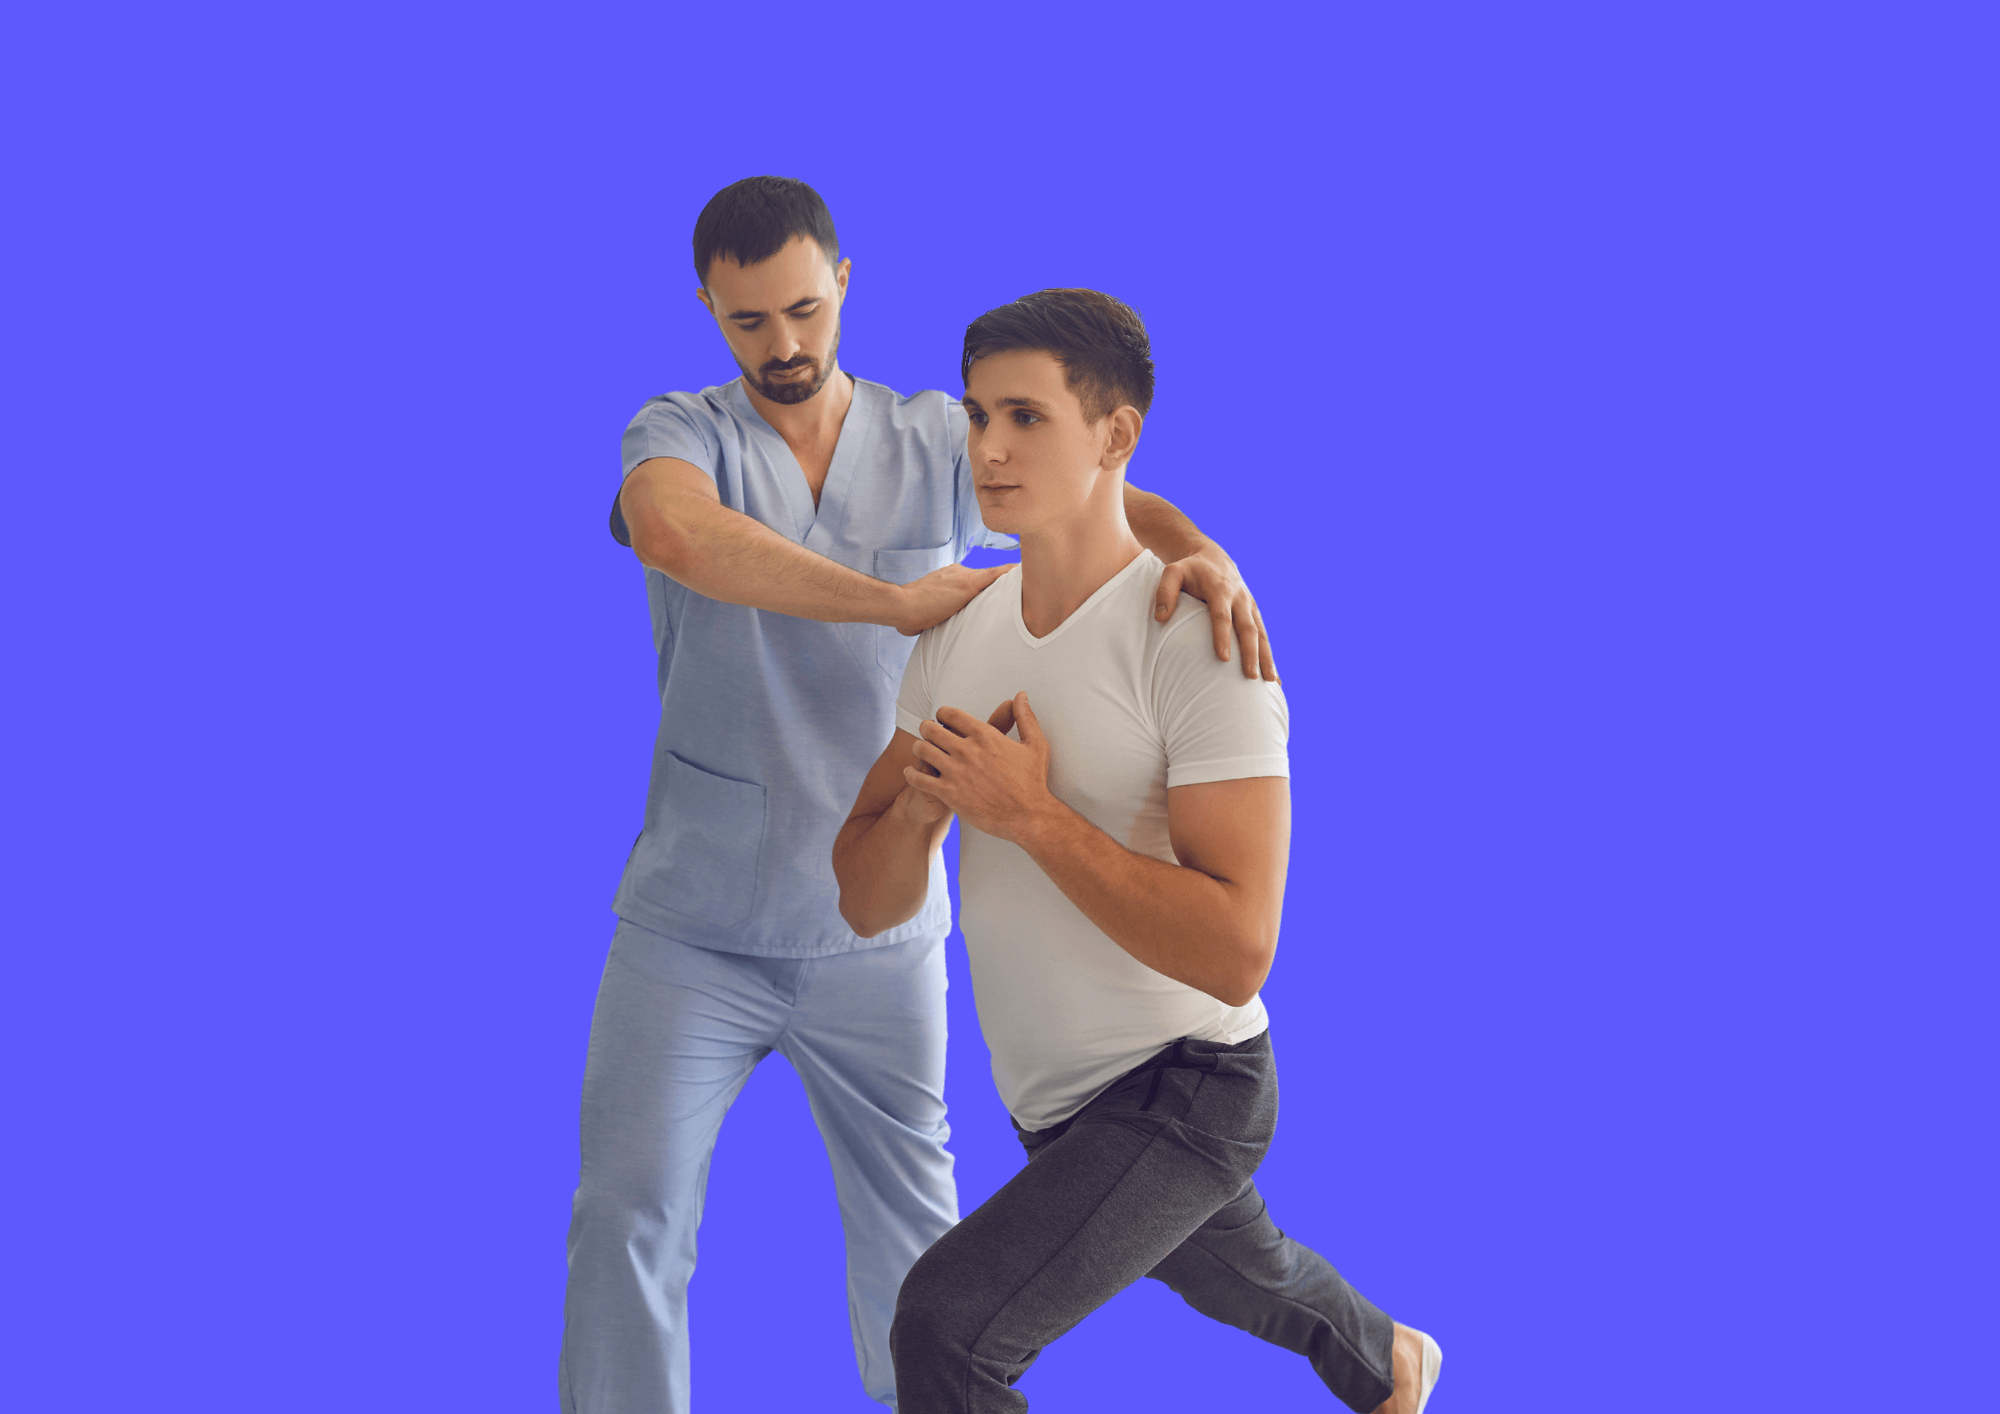 Physiotherapist guiding patient during exercise.